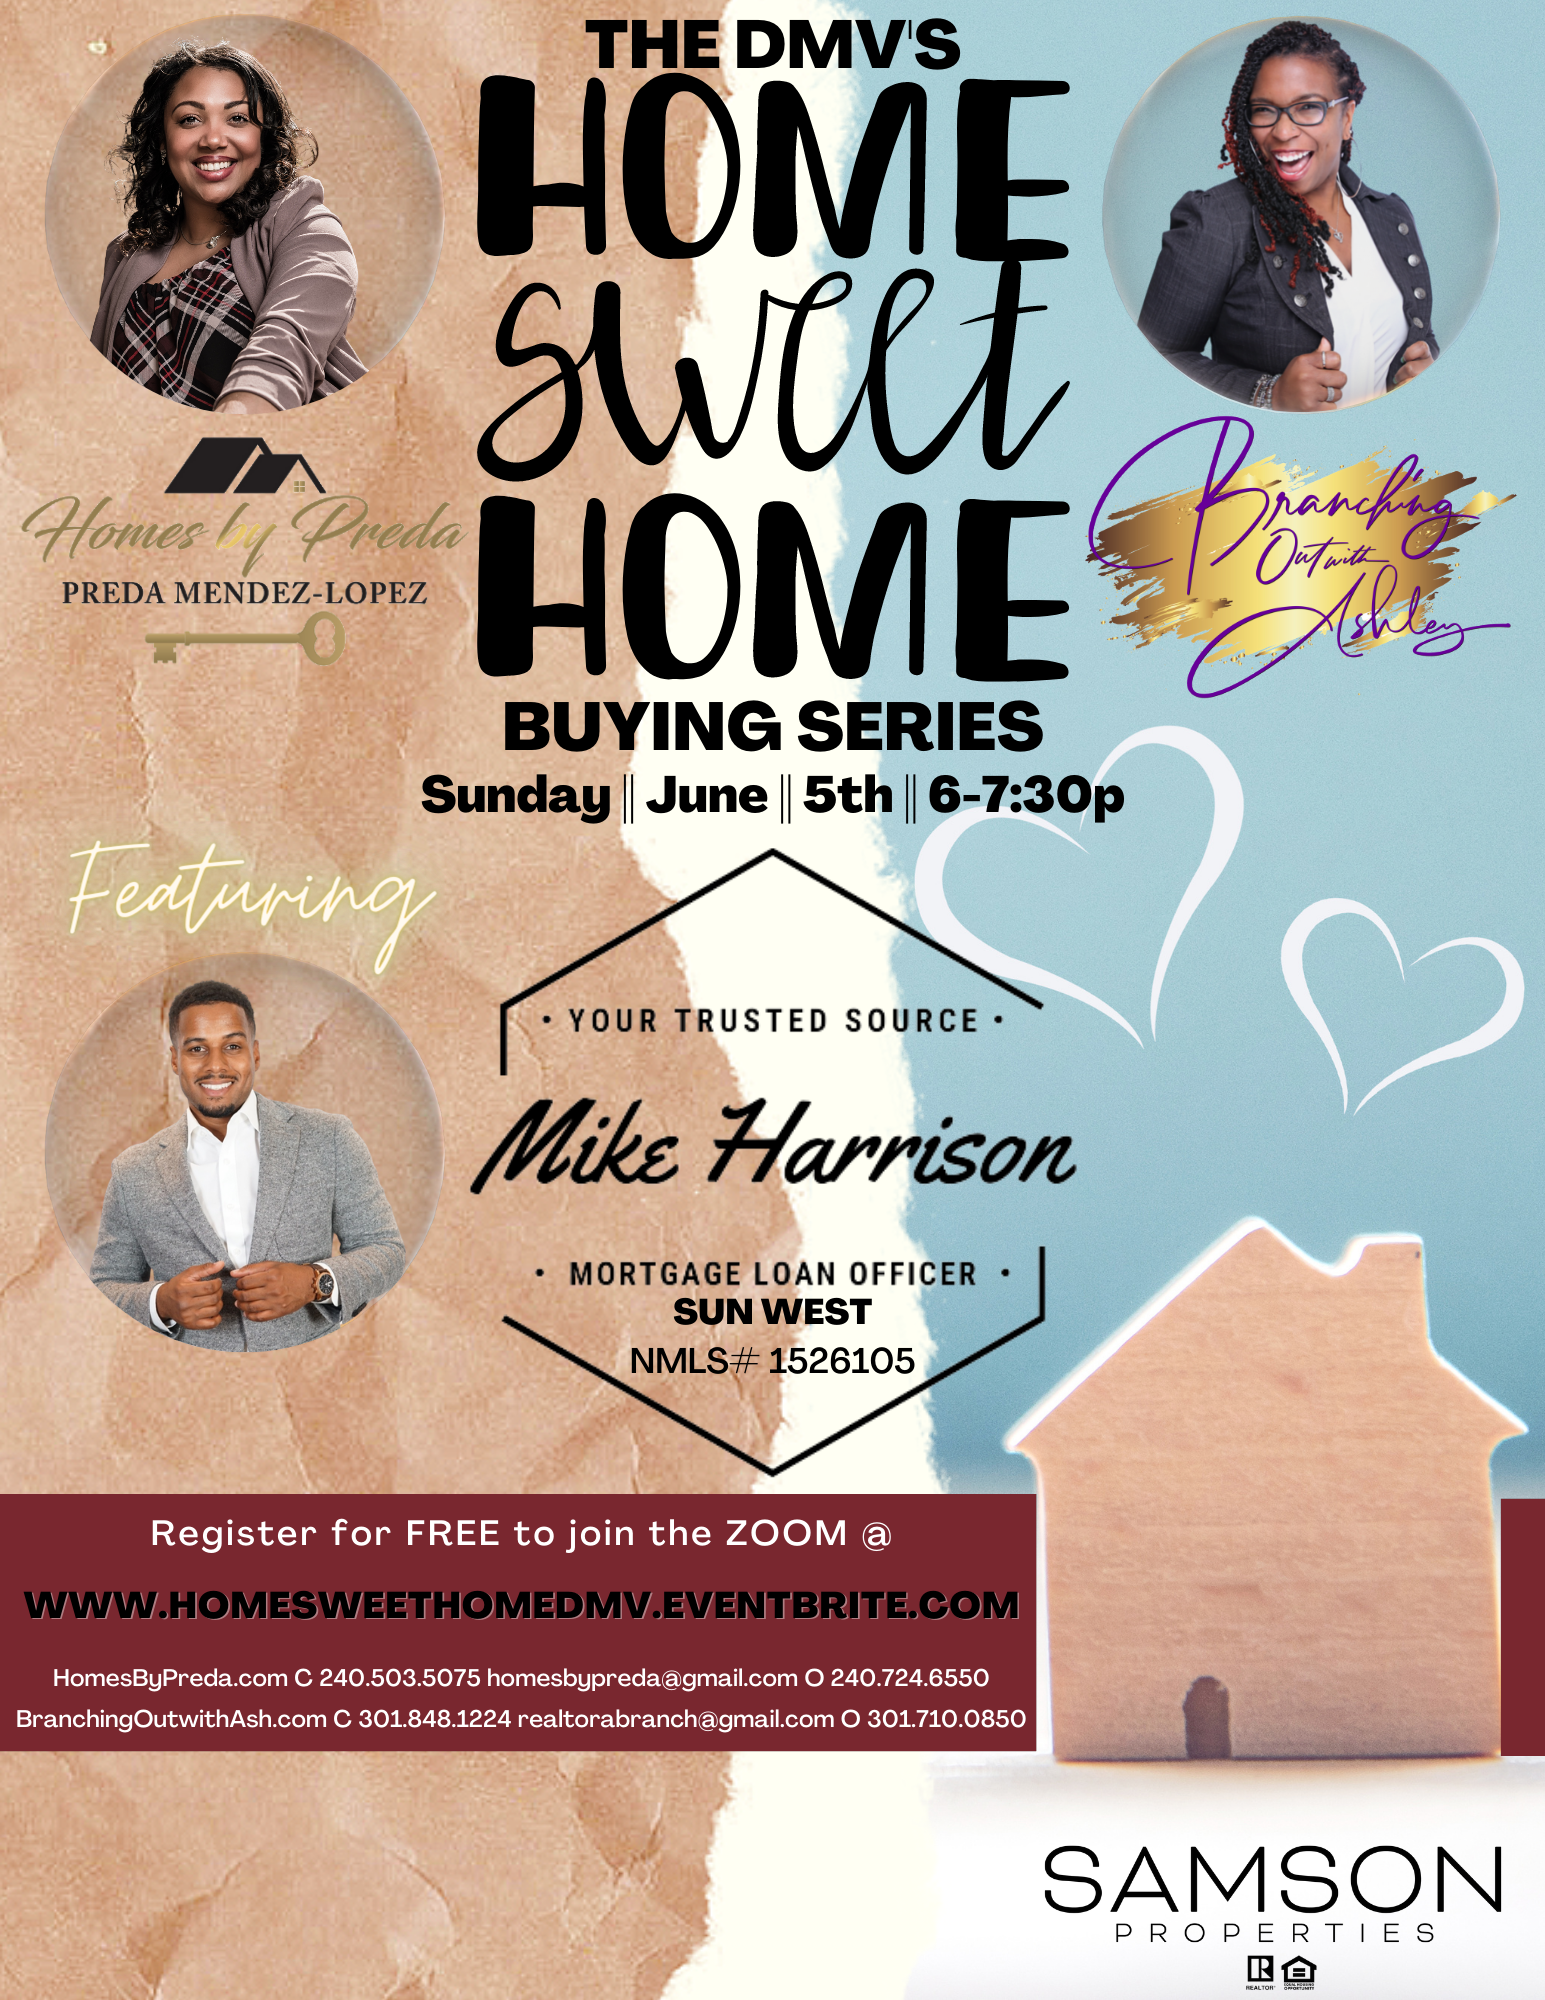 The Home Sweet Home Buying Series